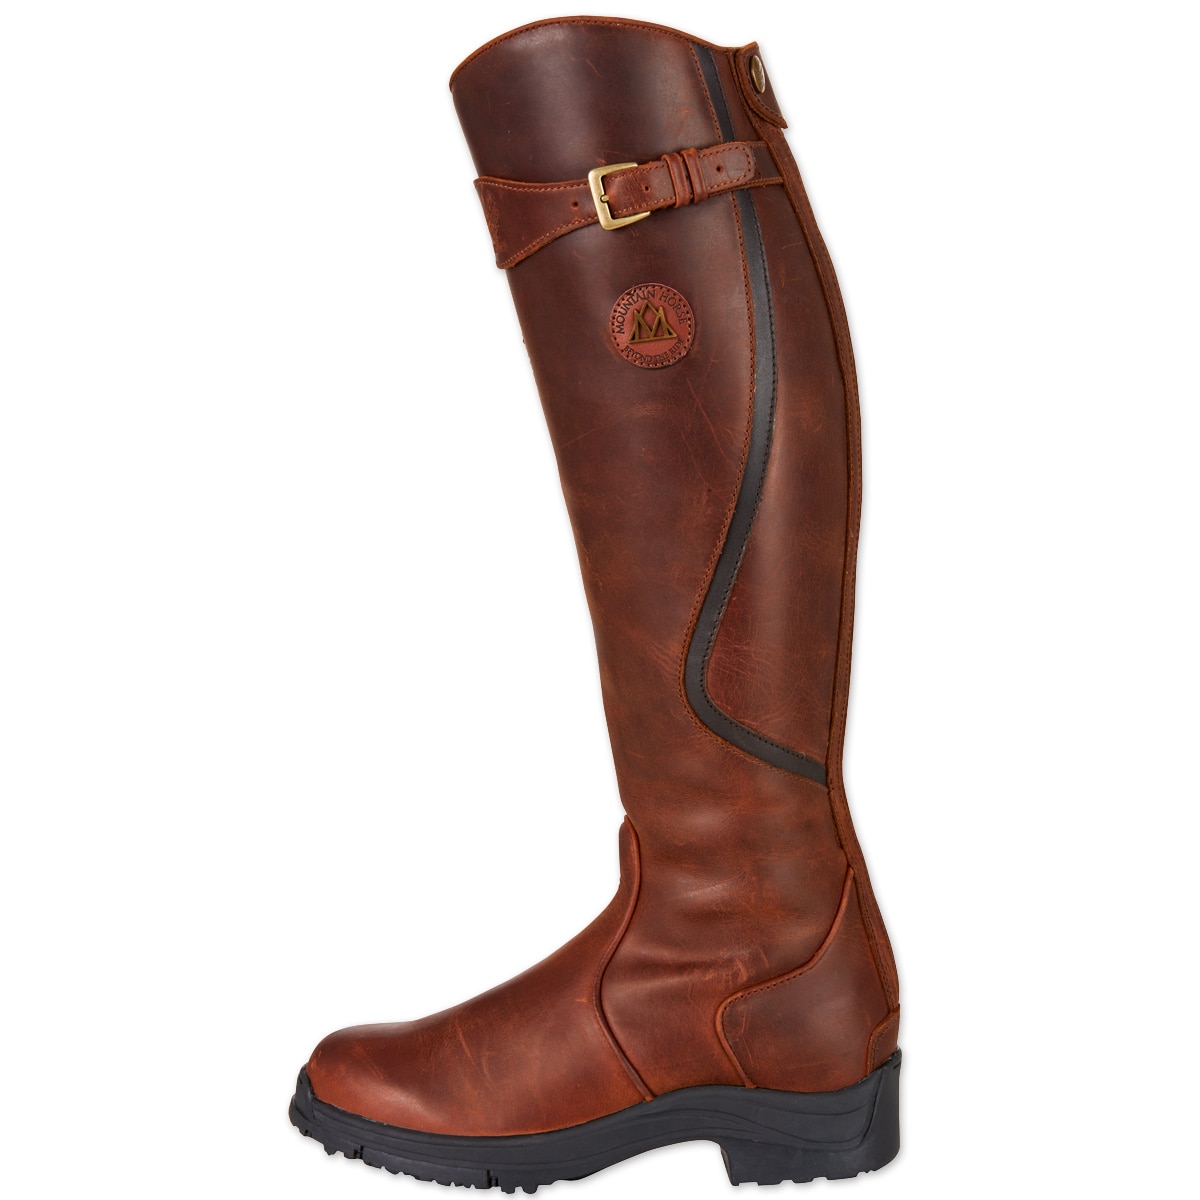 mountain horse snowy river tall winter boot